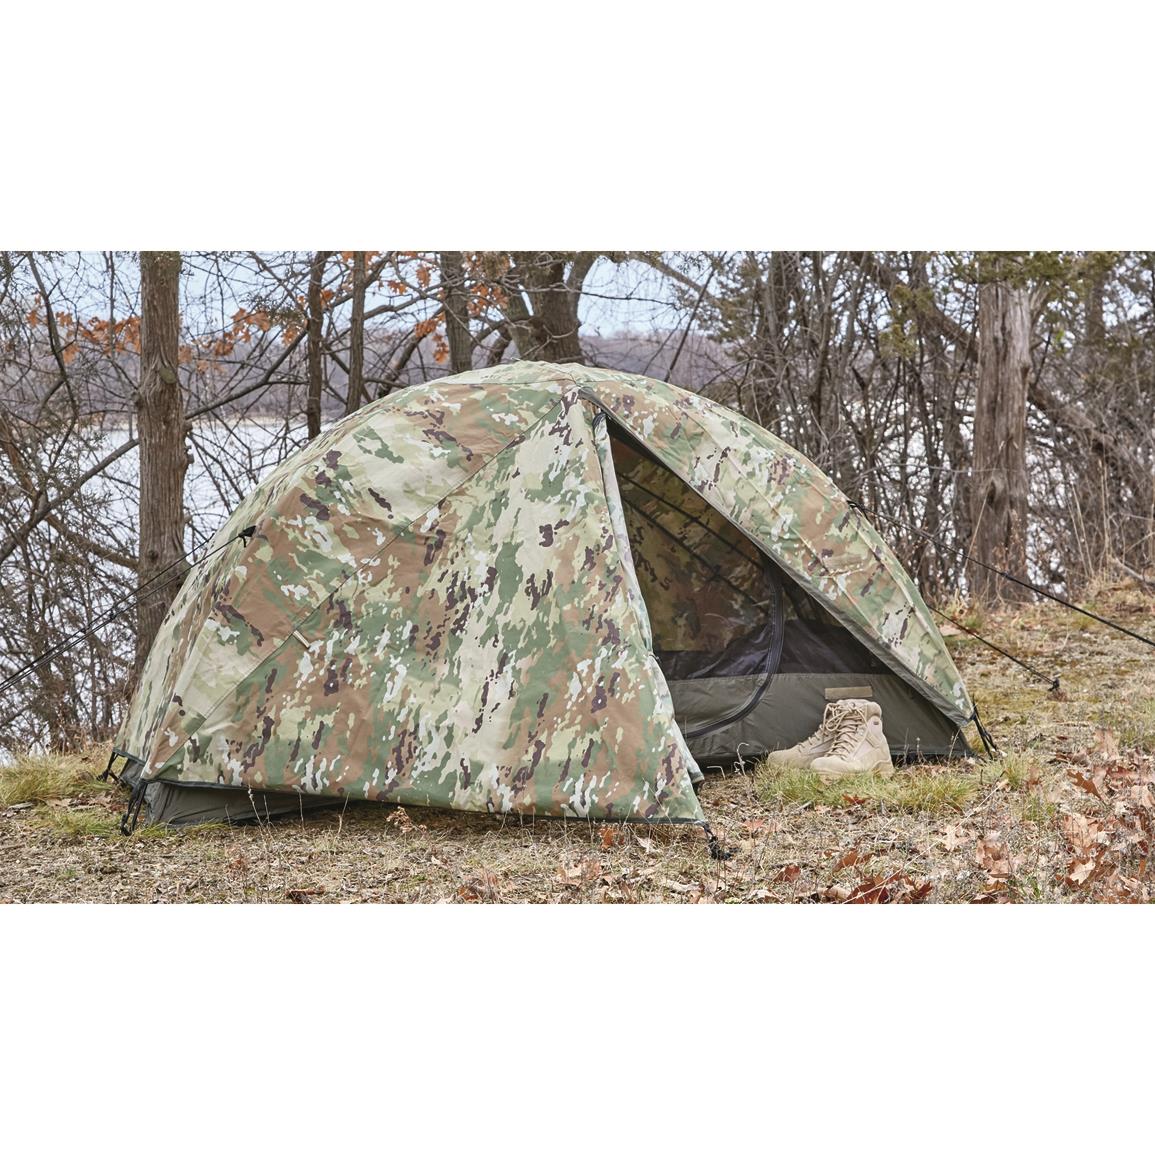 U.S. Military Surplus MGPTS Type 1 Tent System, 18' x 18', Used - 728283,  Camo Tents & Accessories at Sportsman's Guide